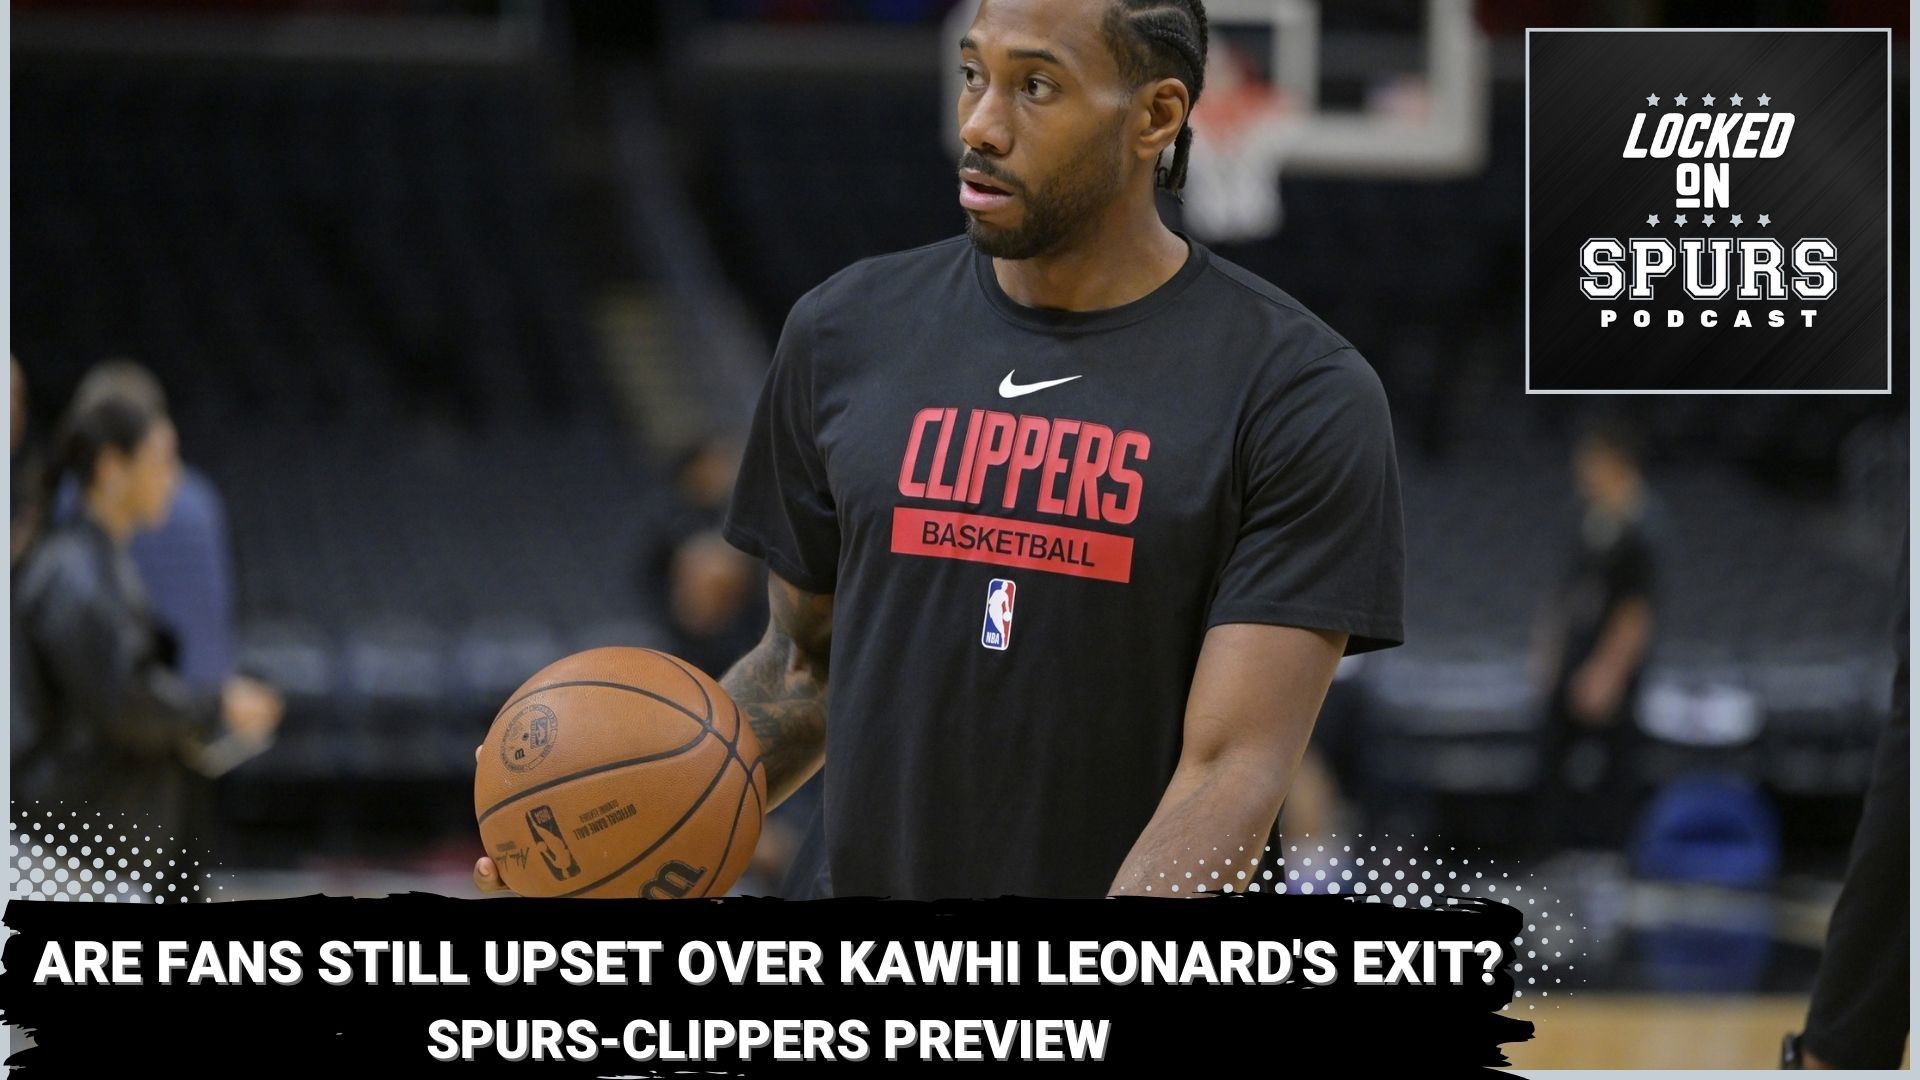 It's been years since Leonard's exit. Are fans still salty?